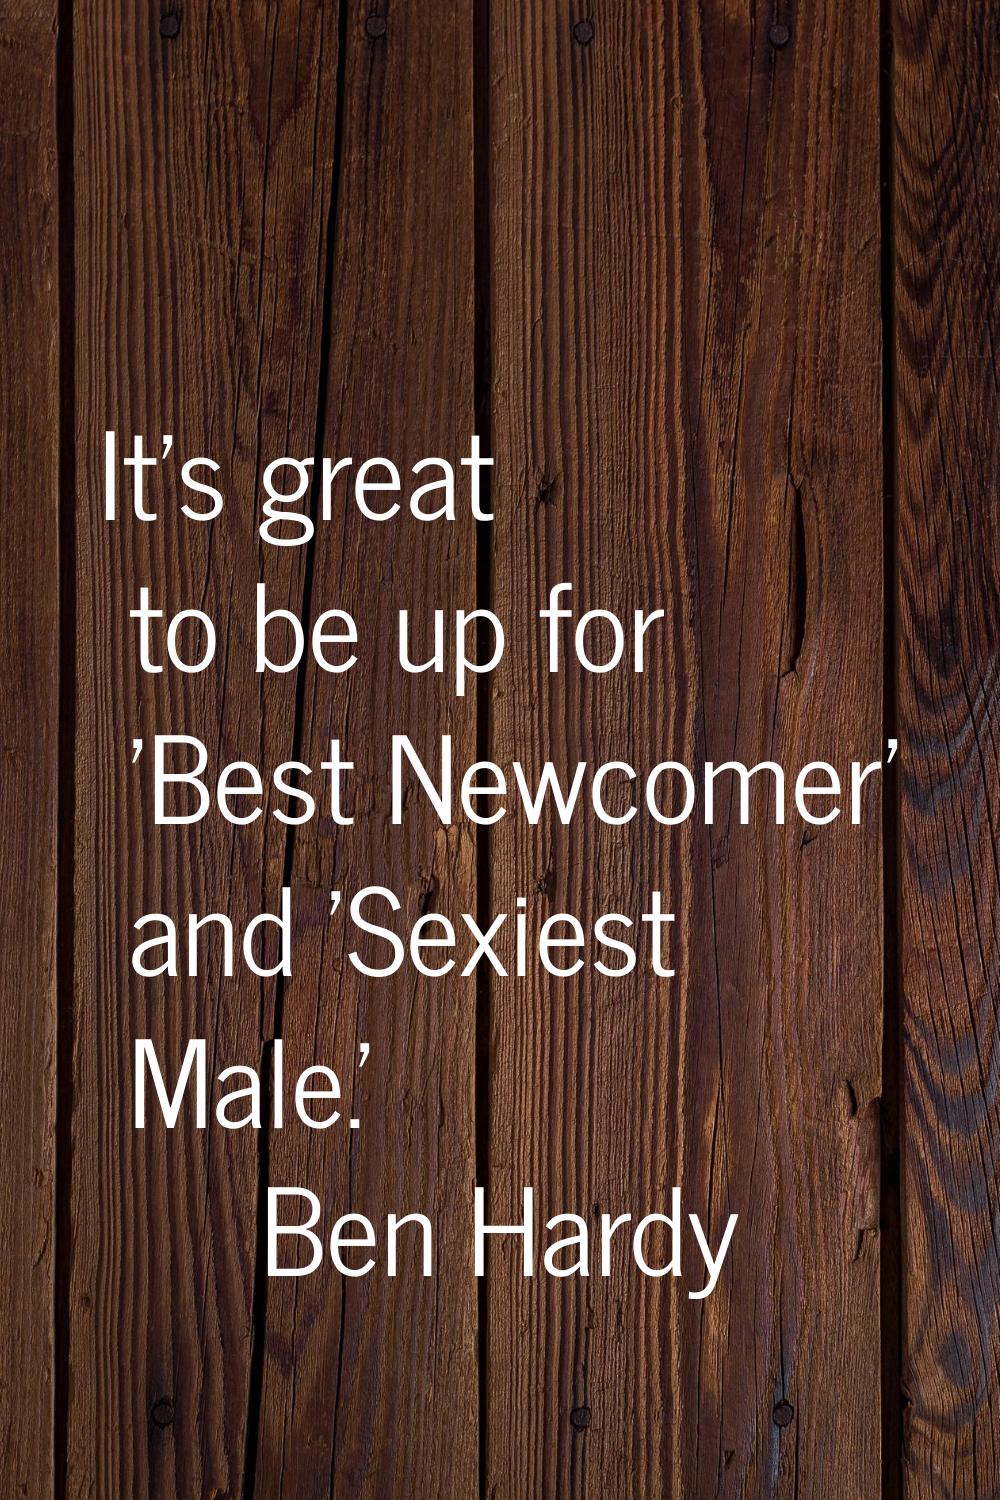 It's great to be up for 'Best Newcomer' and 'Sexiest Male.'